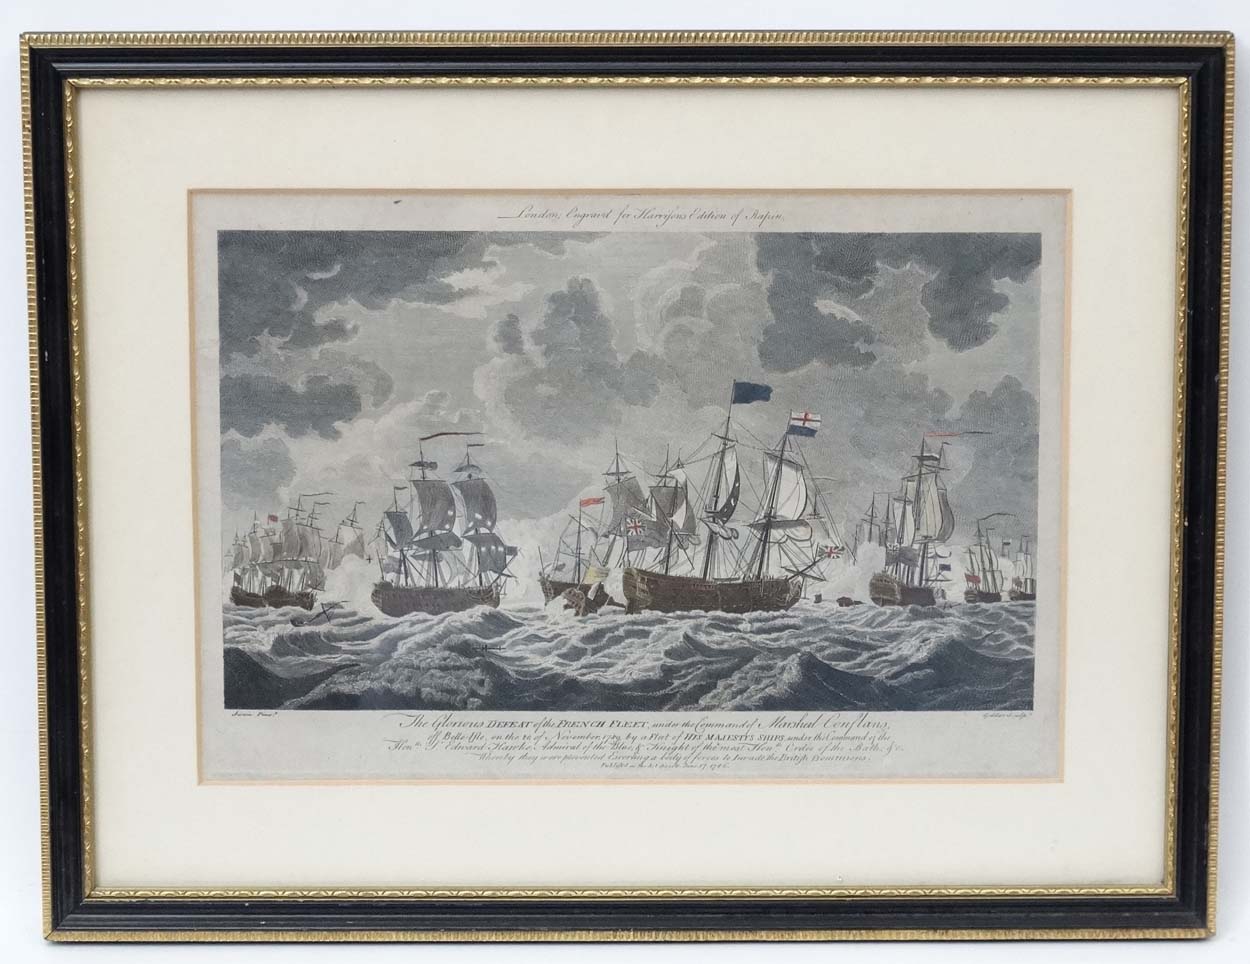 Goldar after Swain 1786, Hand coloured marine engraving, ' The Glorious DEFEAT of the FRENCH FLEET .